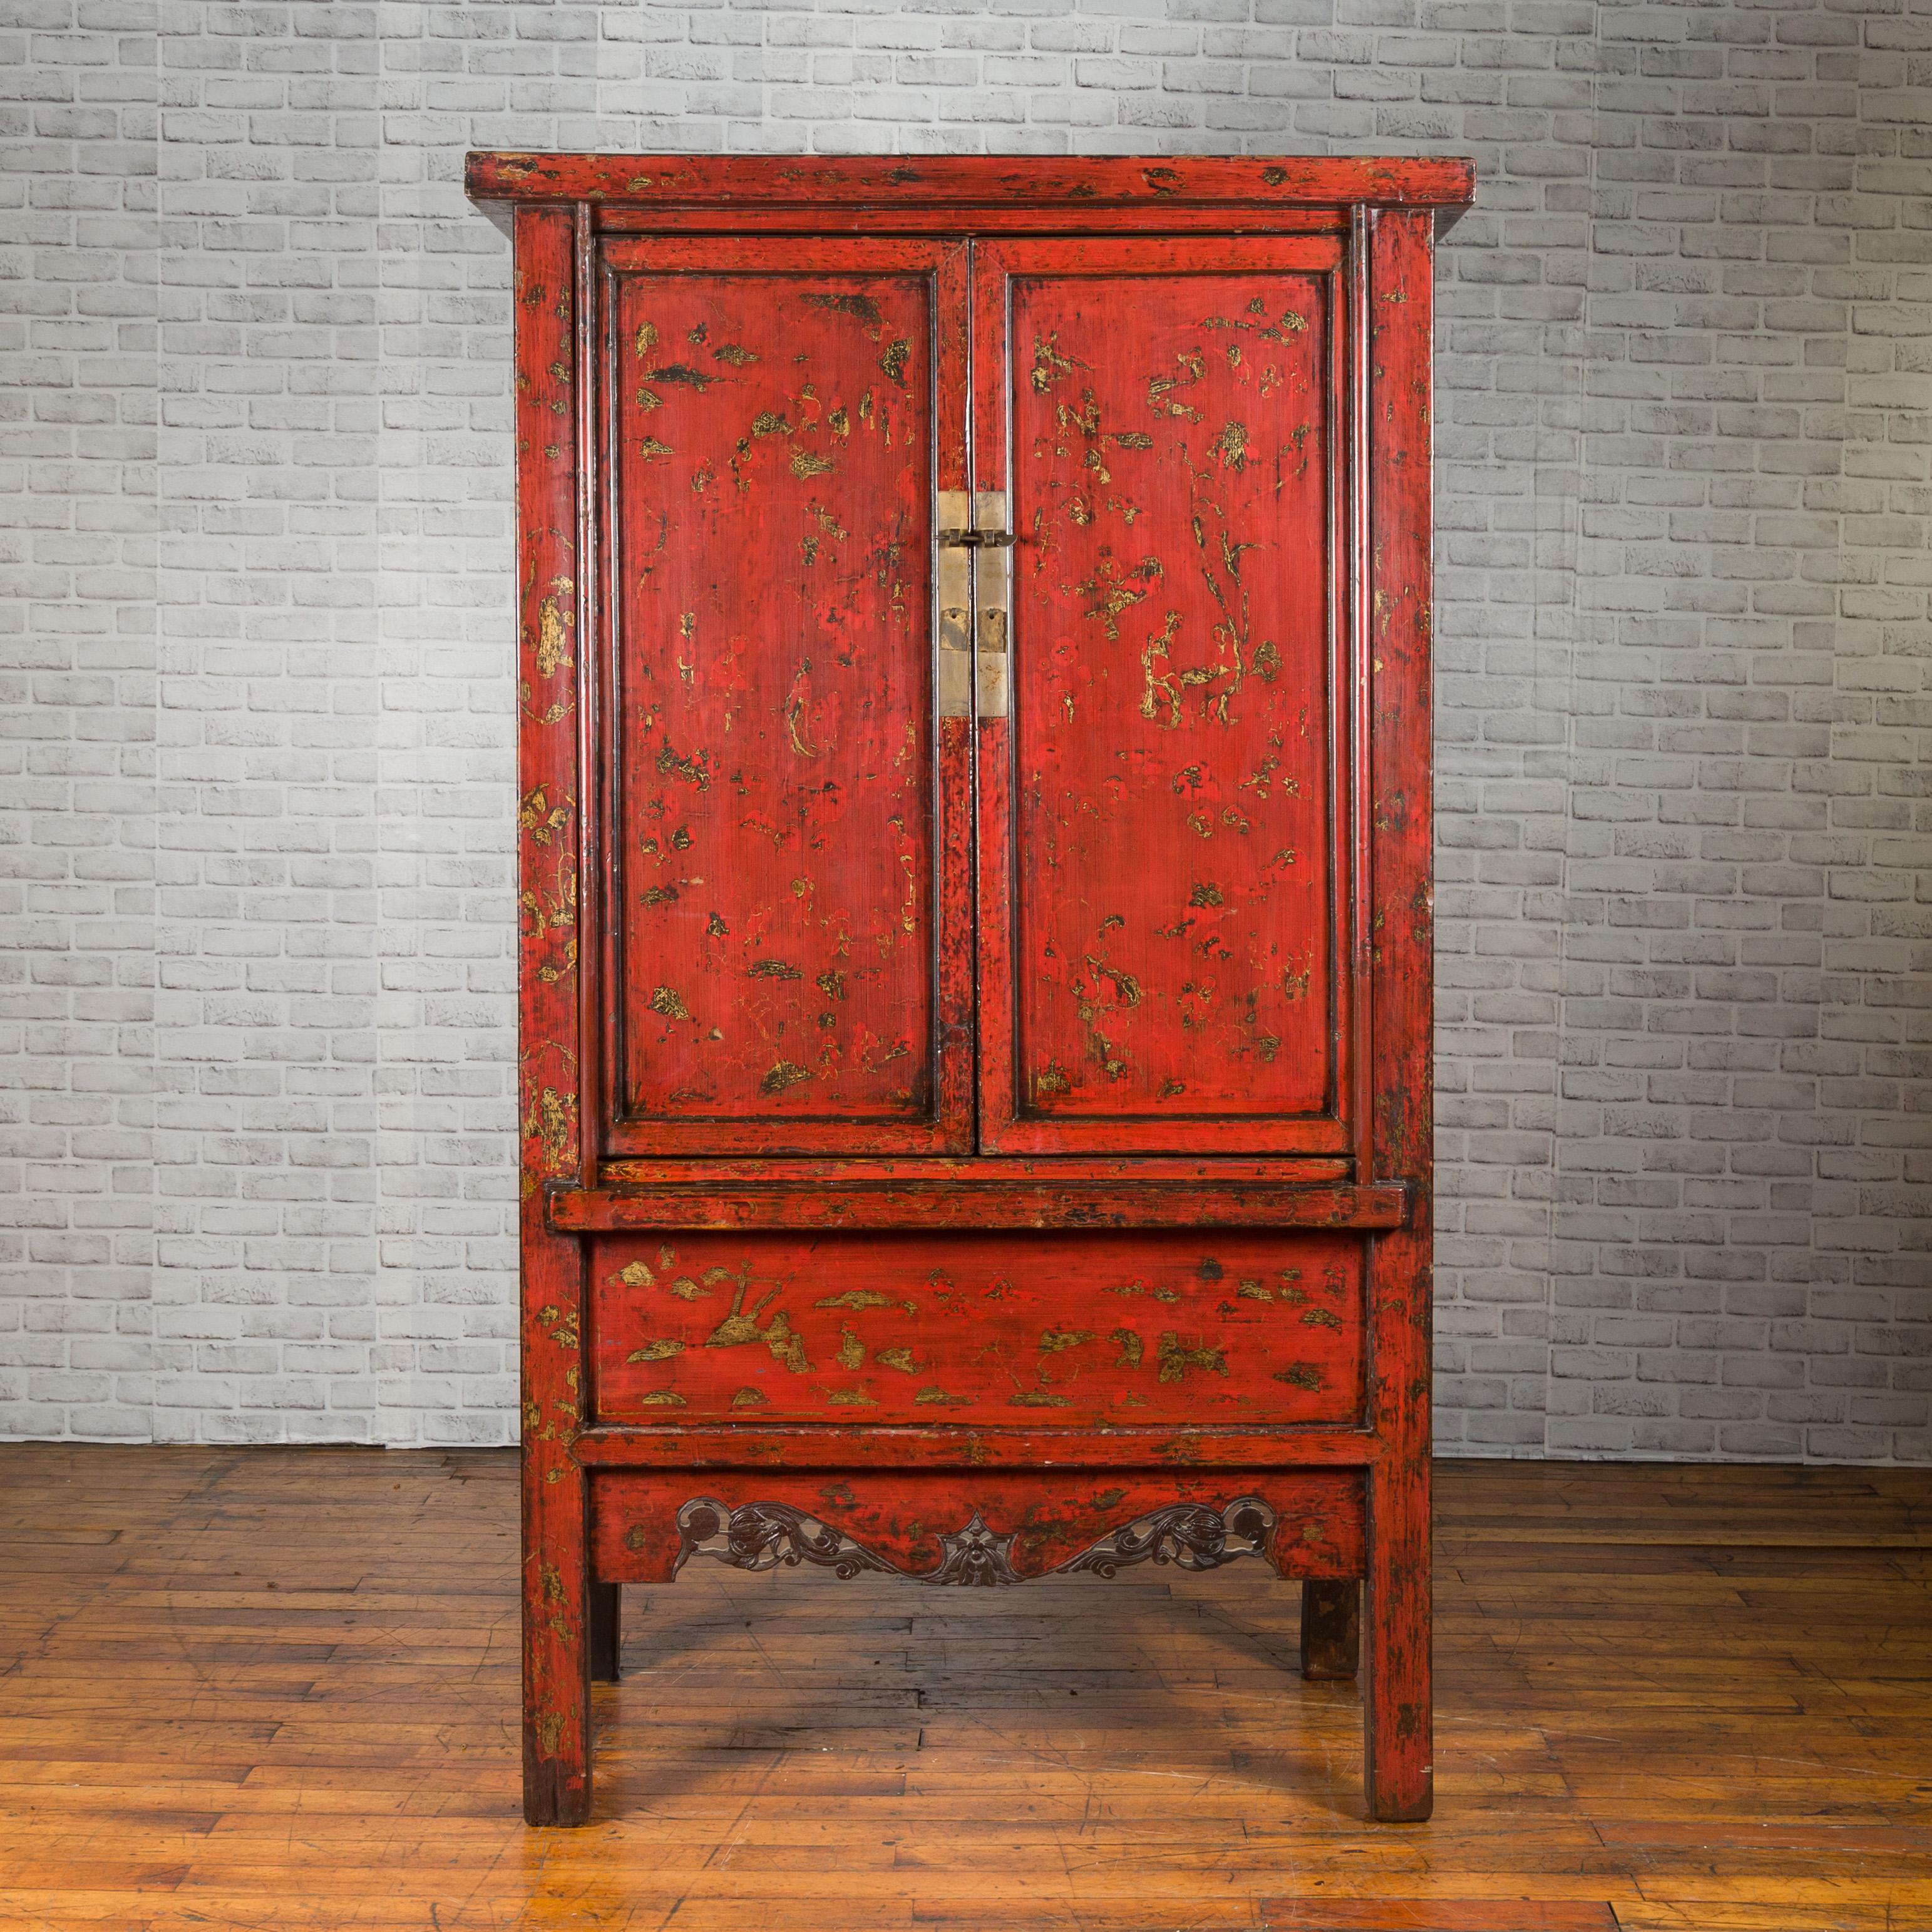 A Chinese Qing Dynasty style red lacquer cabinet from the 20th century, with gilded chinoiserie motifs and carved apron. Created in China during the Qing Dynasty, this cabinet features a red lacquered finish accented with traces of a delicate gilt